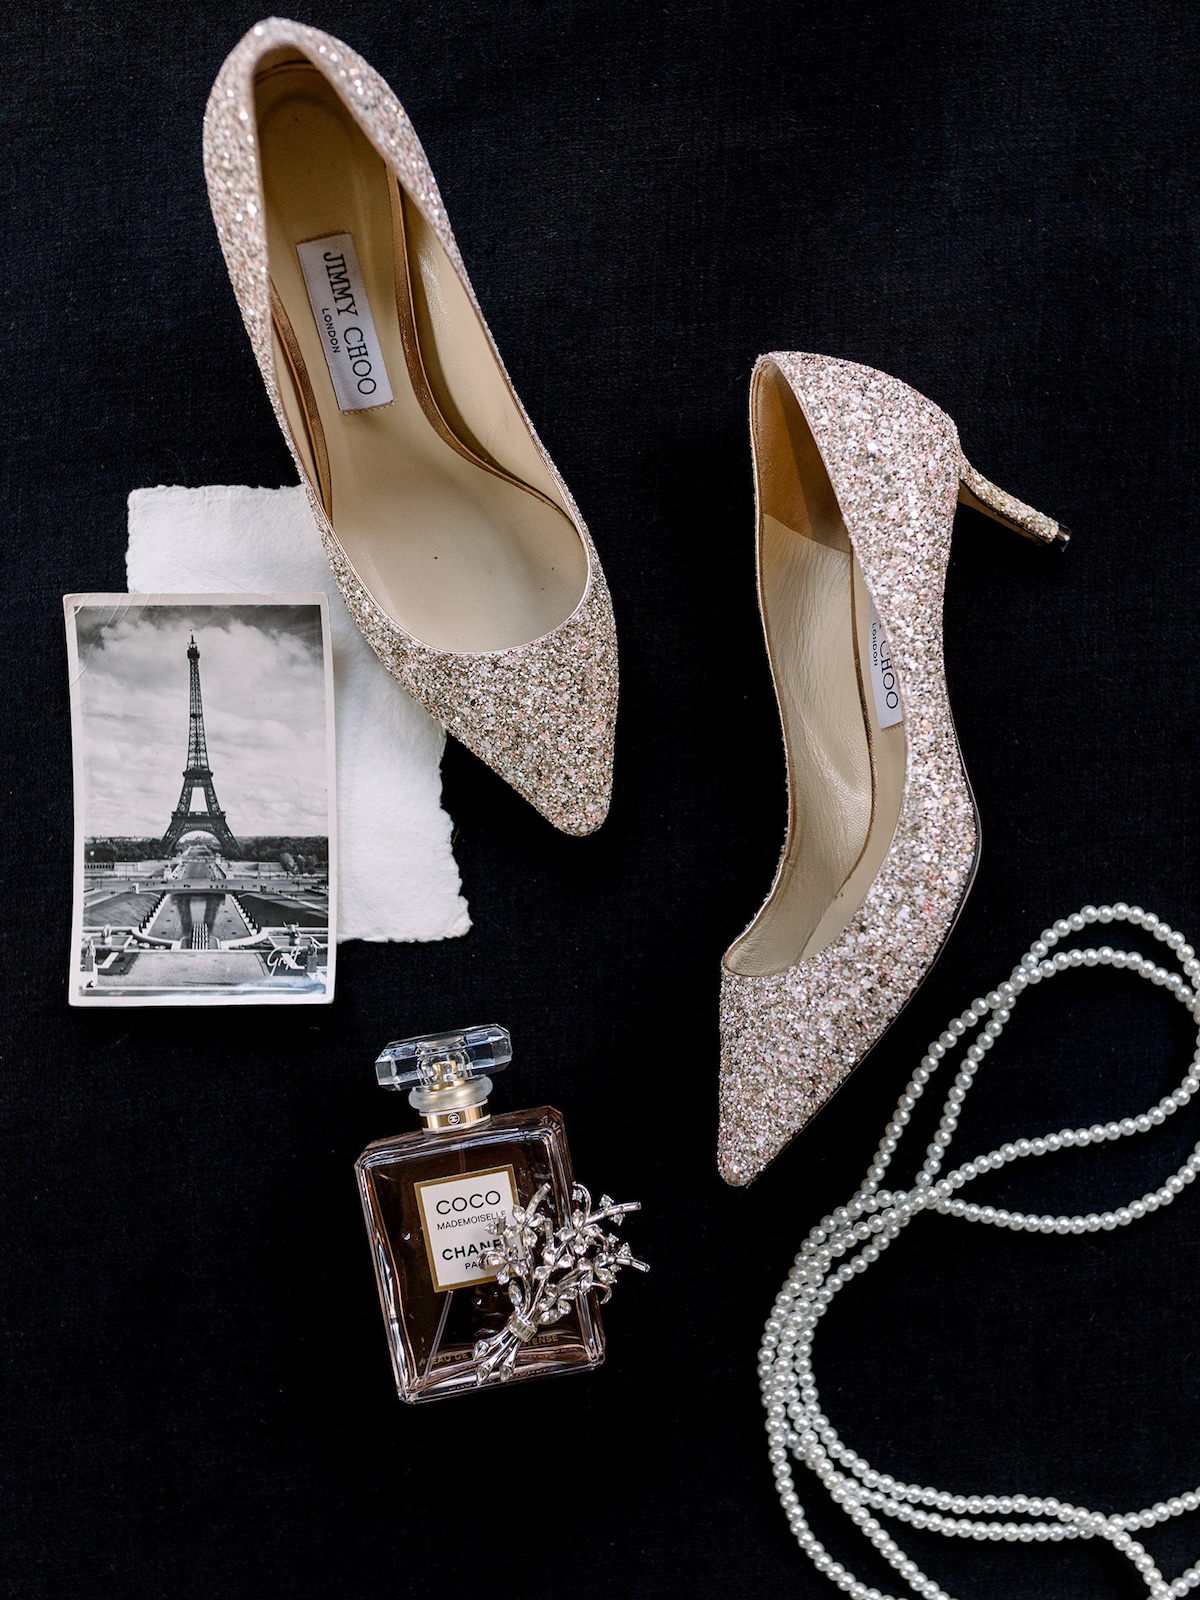 A meticulously styled flatlay showcasing the bride's accessories, from shoes to jewelry, in a display of refined taste.